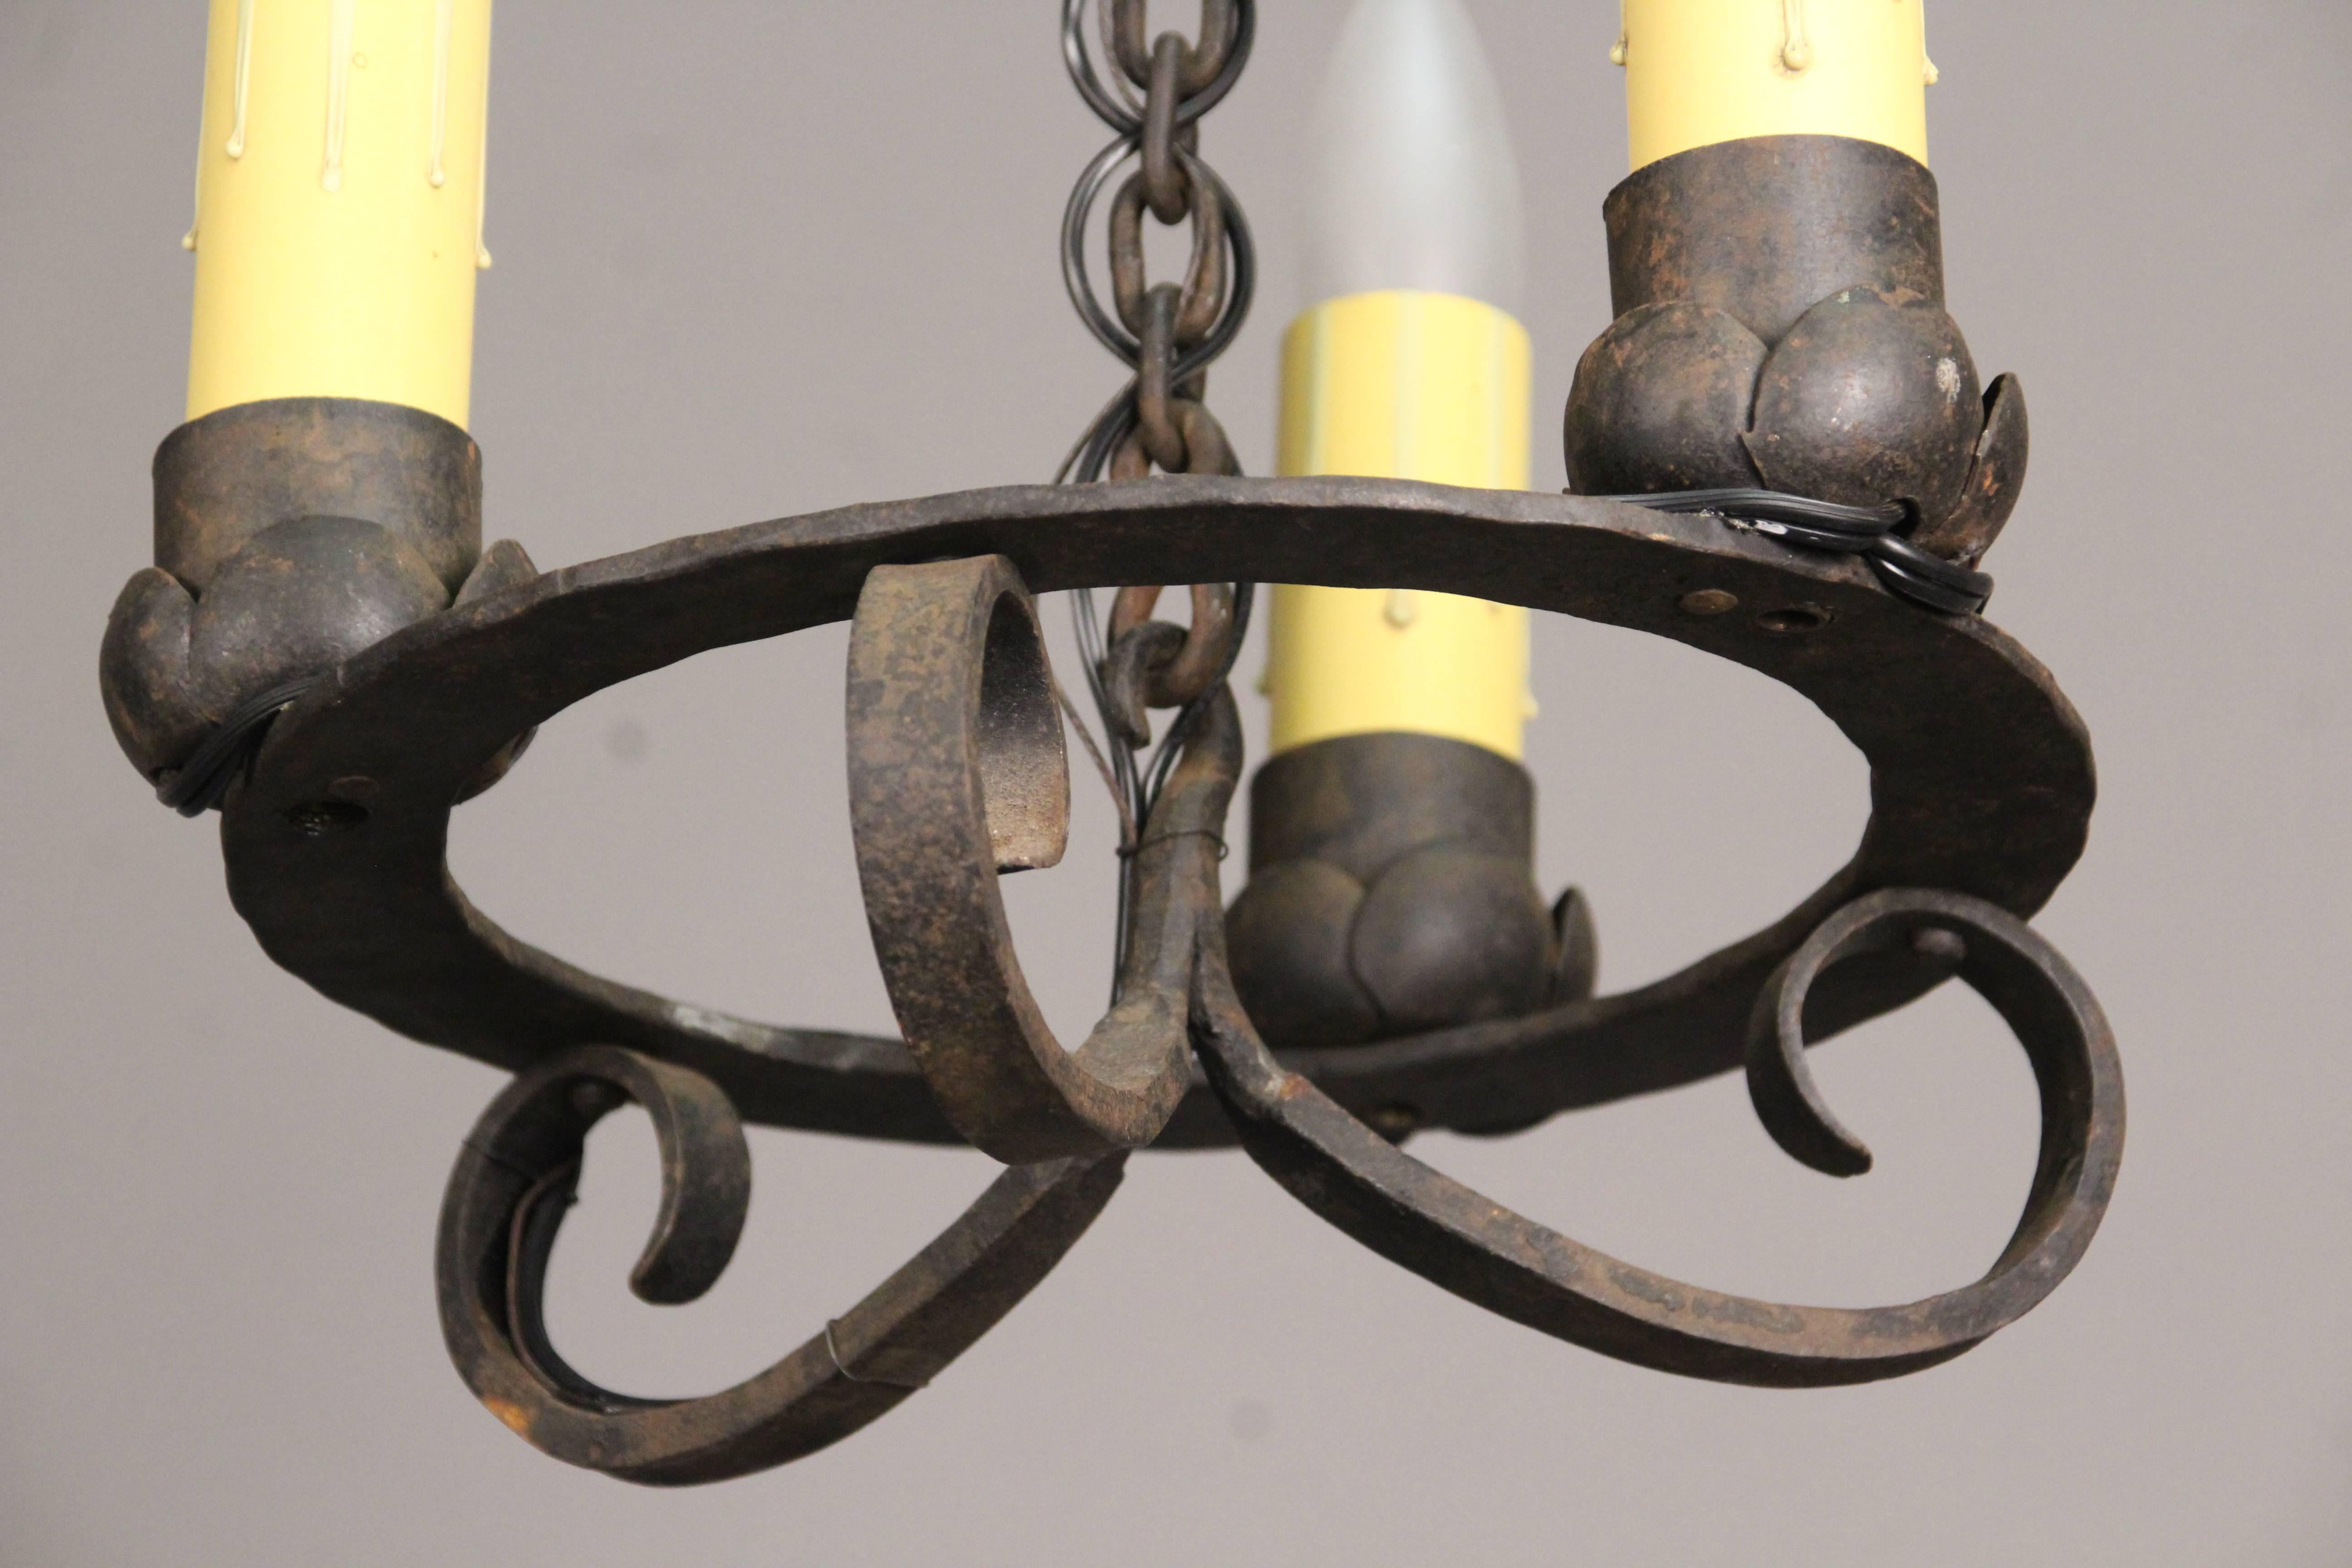 Spanish Colonial Antique 1920s Elegant and Simple Spanish Revival Wrought Iron Chandelier